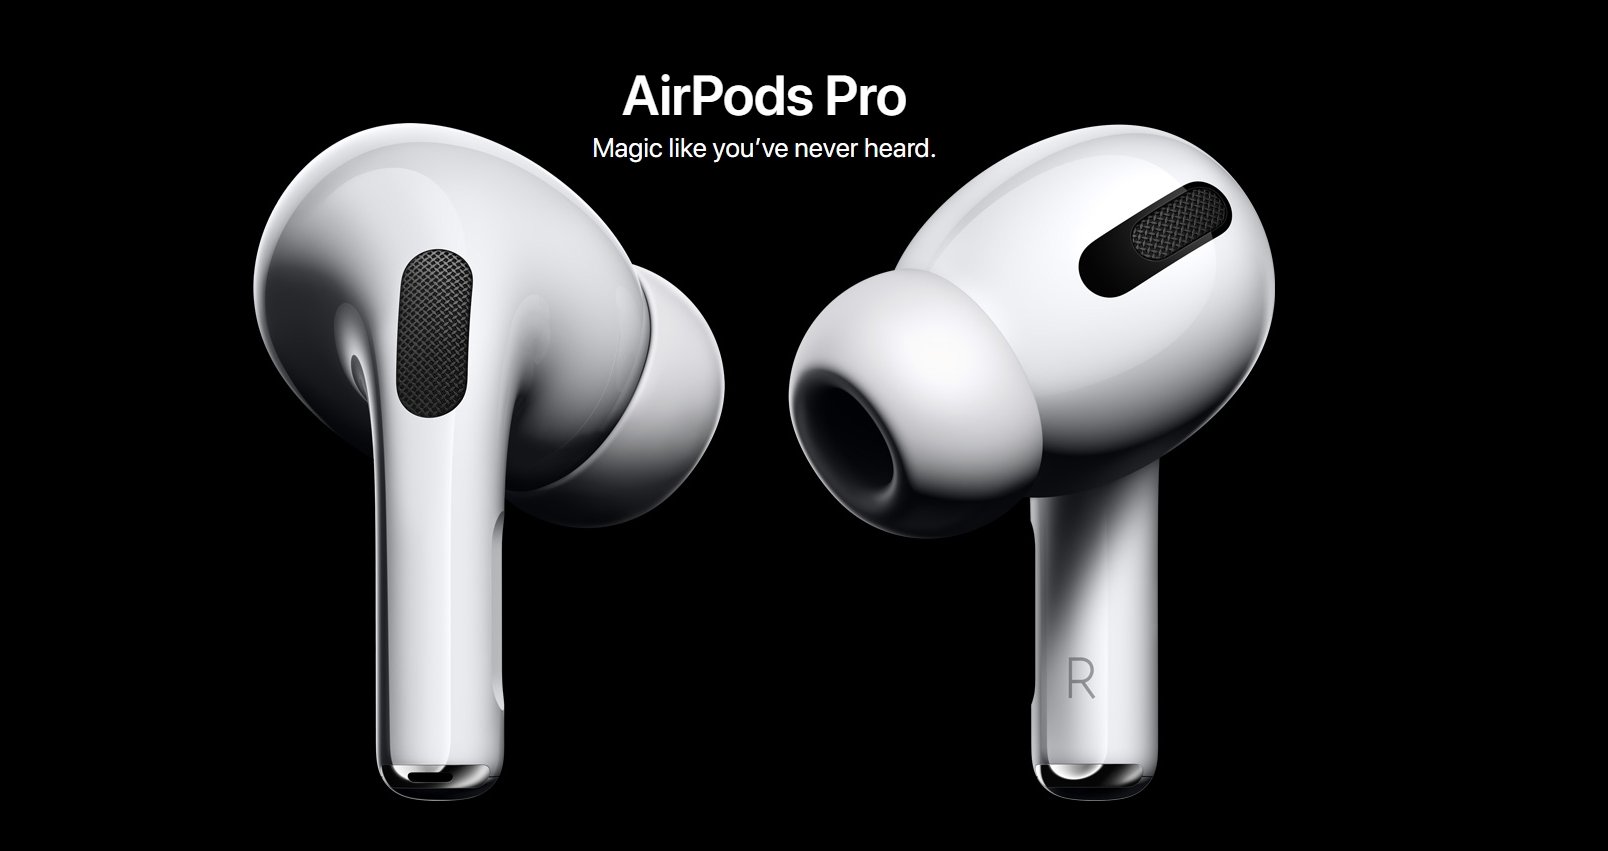 Apple to launch 2nd Gen AirPods Pro in first half of 2021: Report